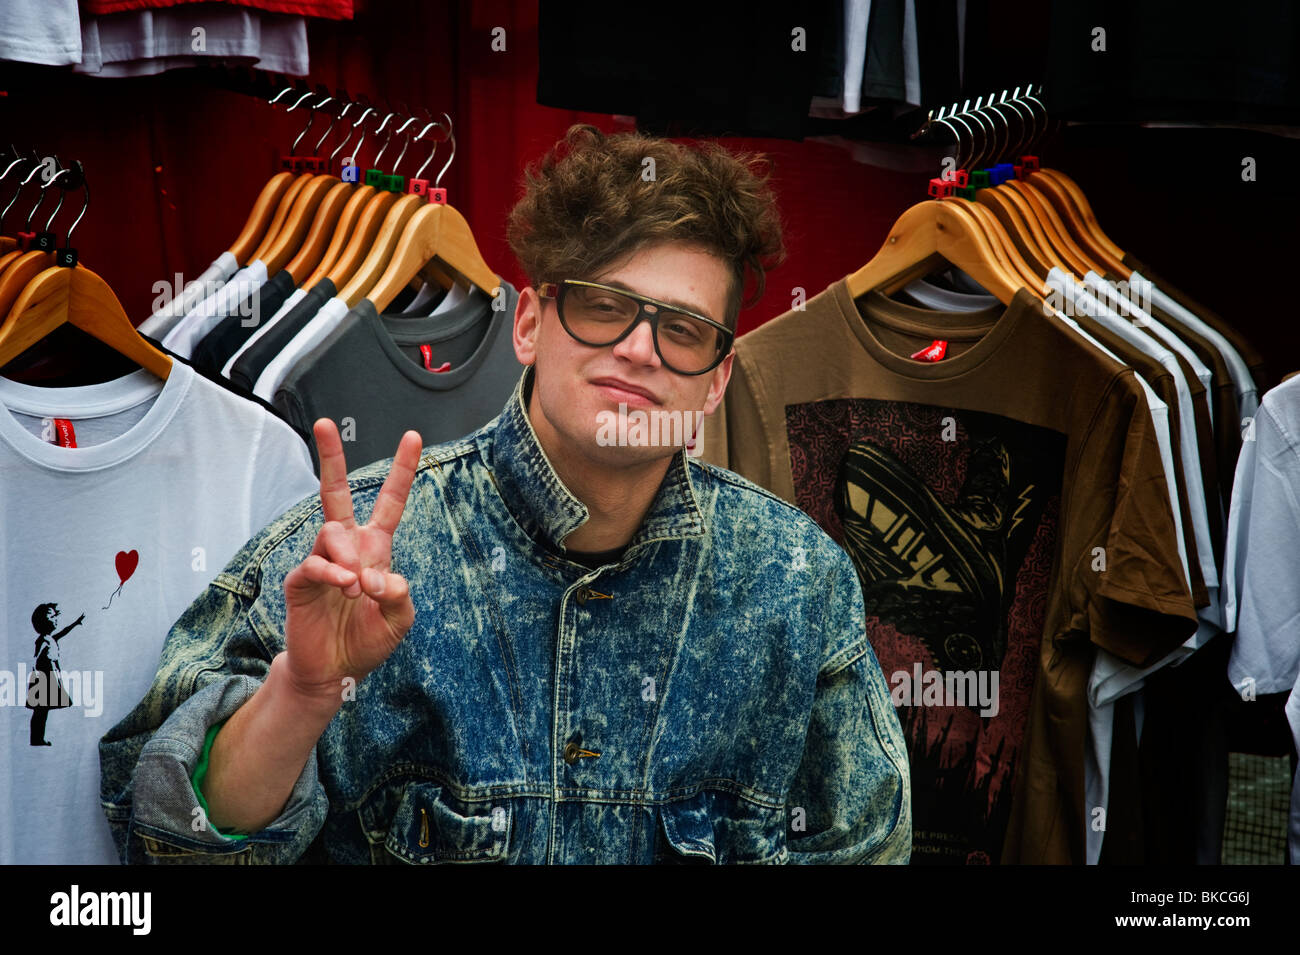 A young male adult wearing glasses at a clothing market stall owner at Camden Market North London UK Stock Photo